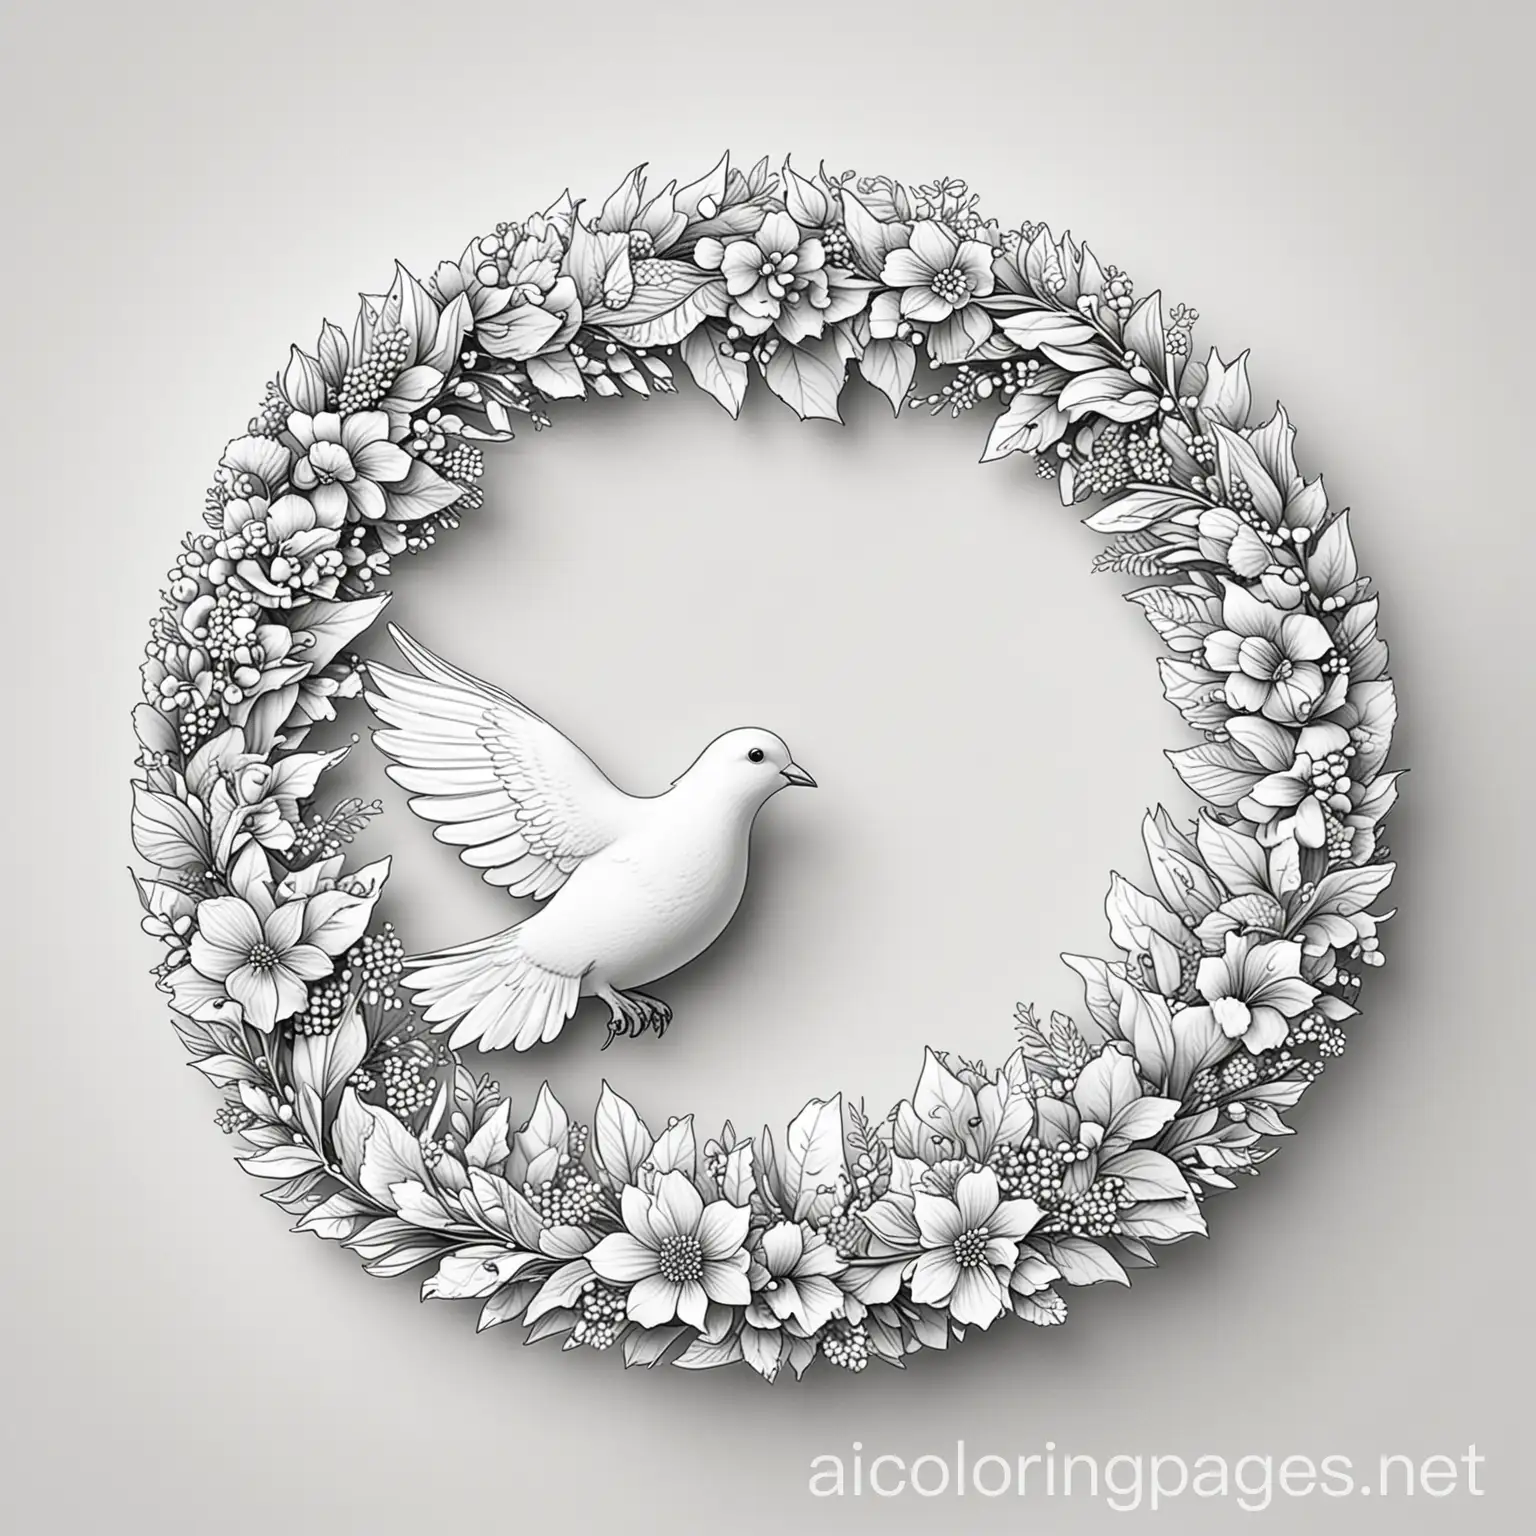 Circle flower garland dove, Coloring Page, black and white, line art, white background, Simplicity, Ample White Space.